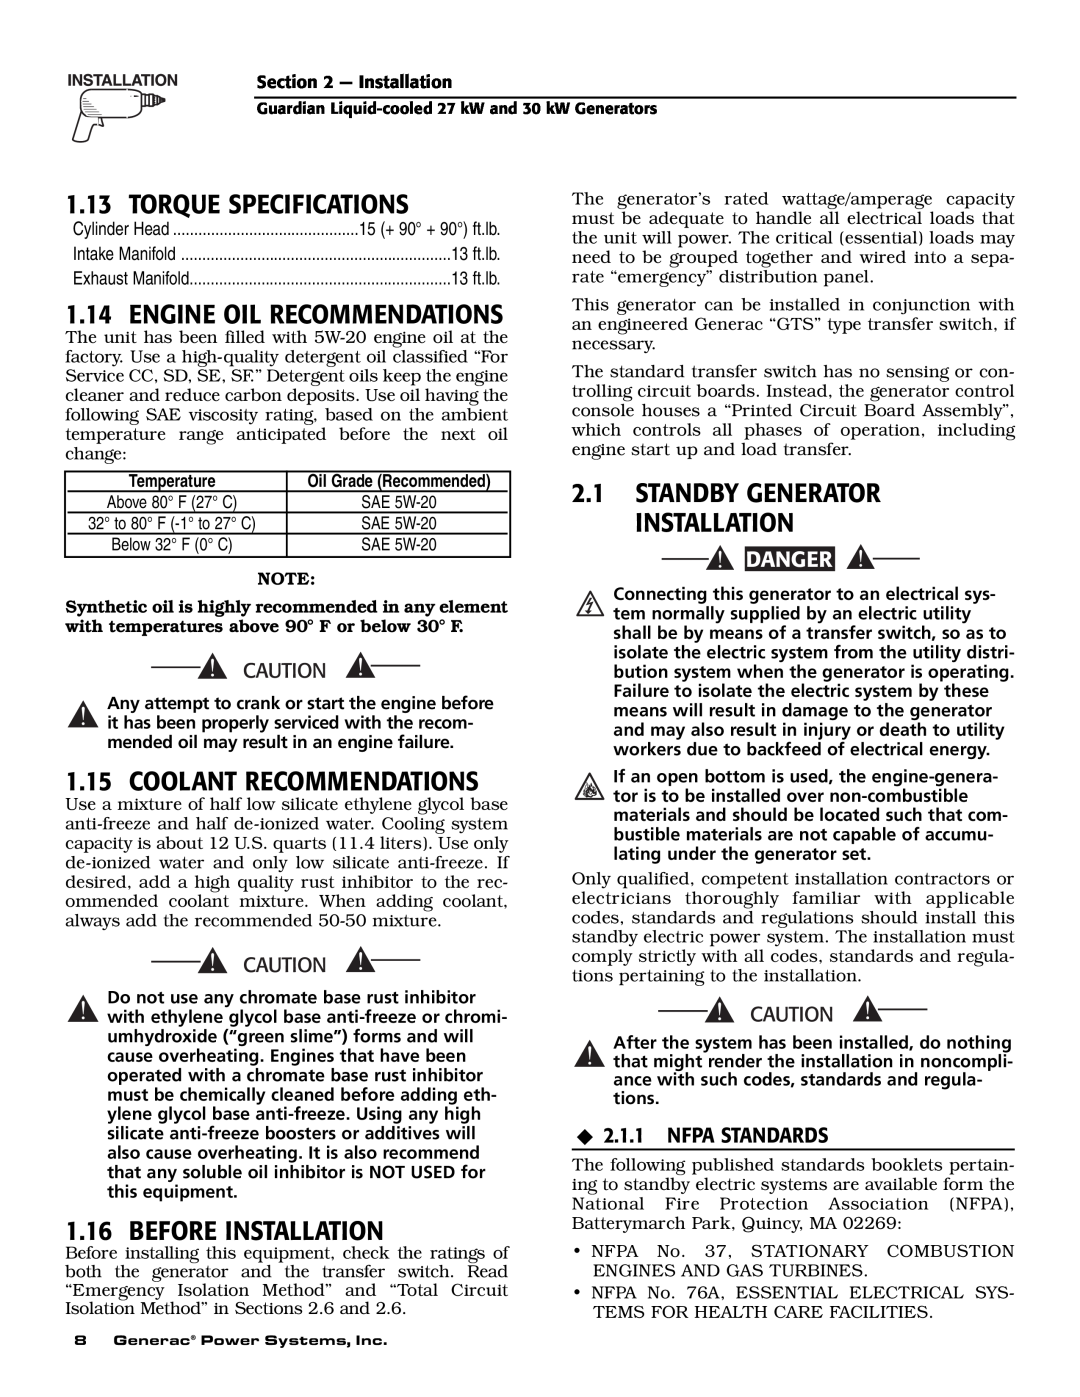 Generac Power Systems 004988-1 Torque Specifications, Engine Oil Recommendations, Coolant Recommendations, Temperature 